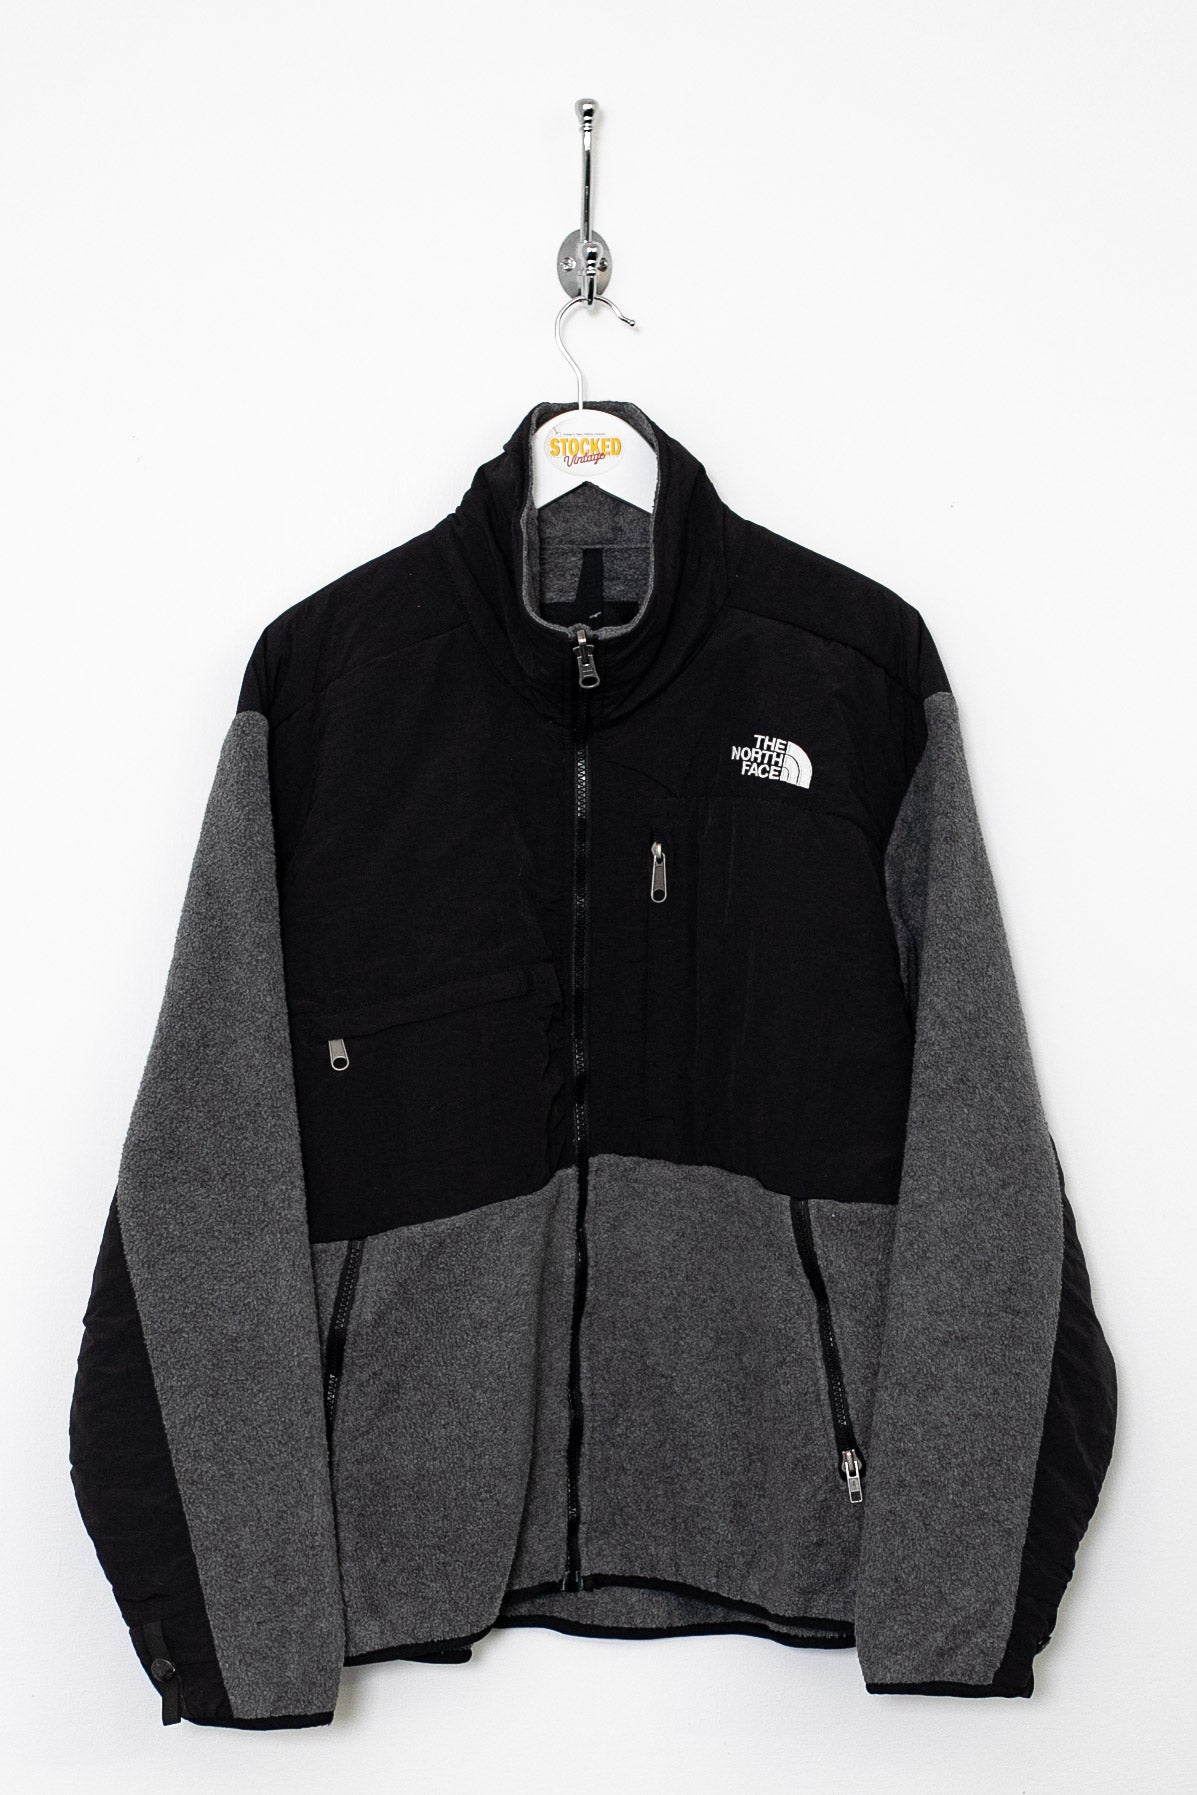 Online Vintage Store, 90's The North Face Fleece